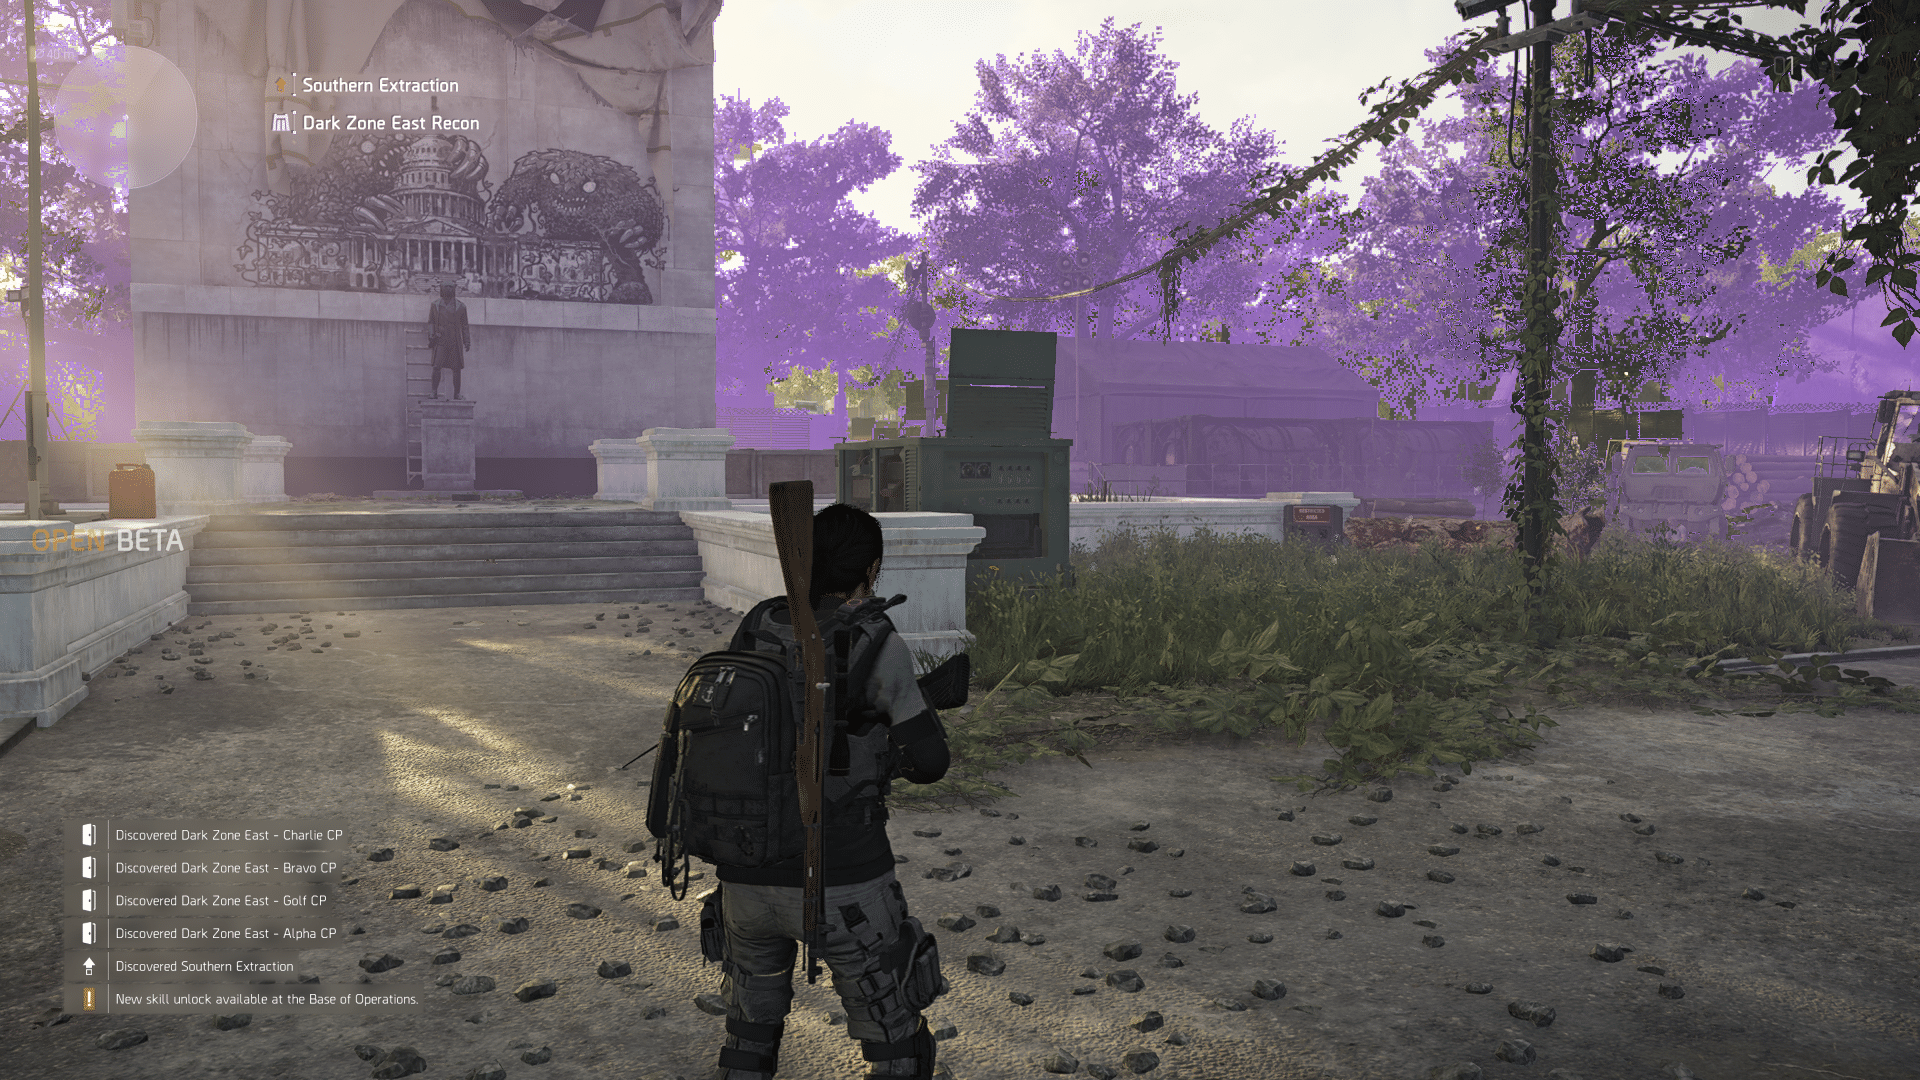 TheDivision2 3 4 2019 8 41 14 PM 948